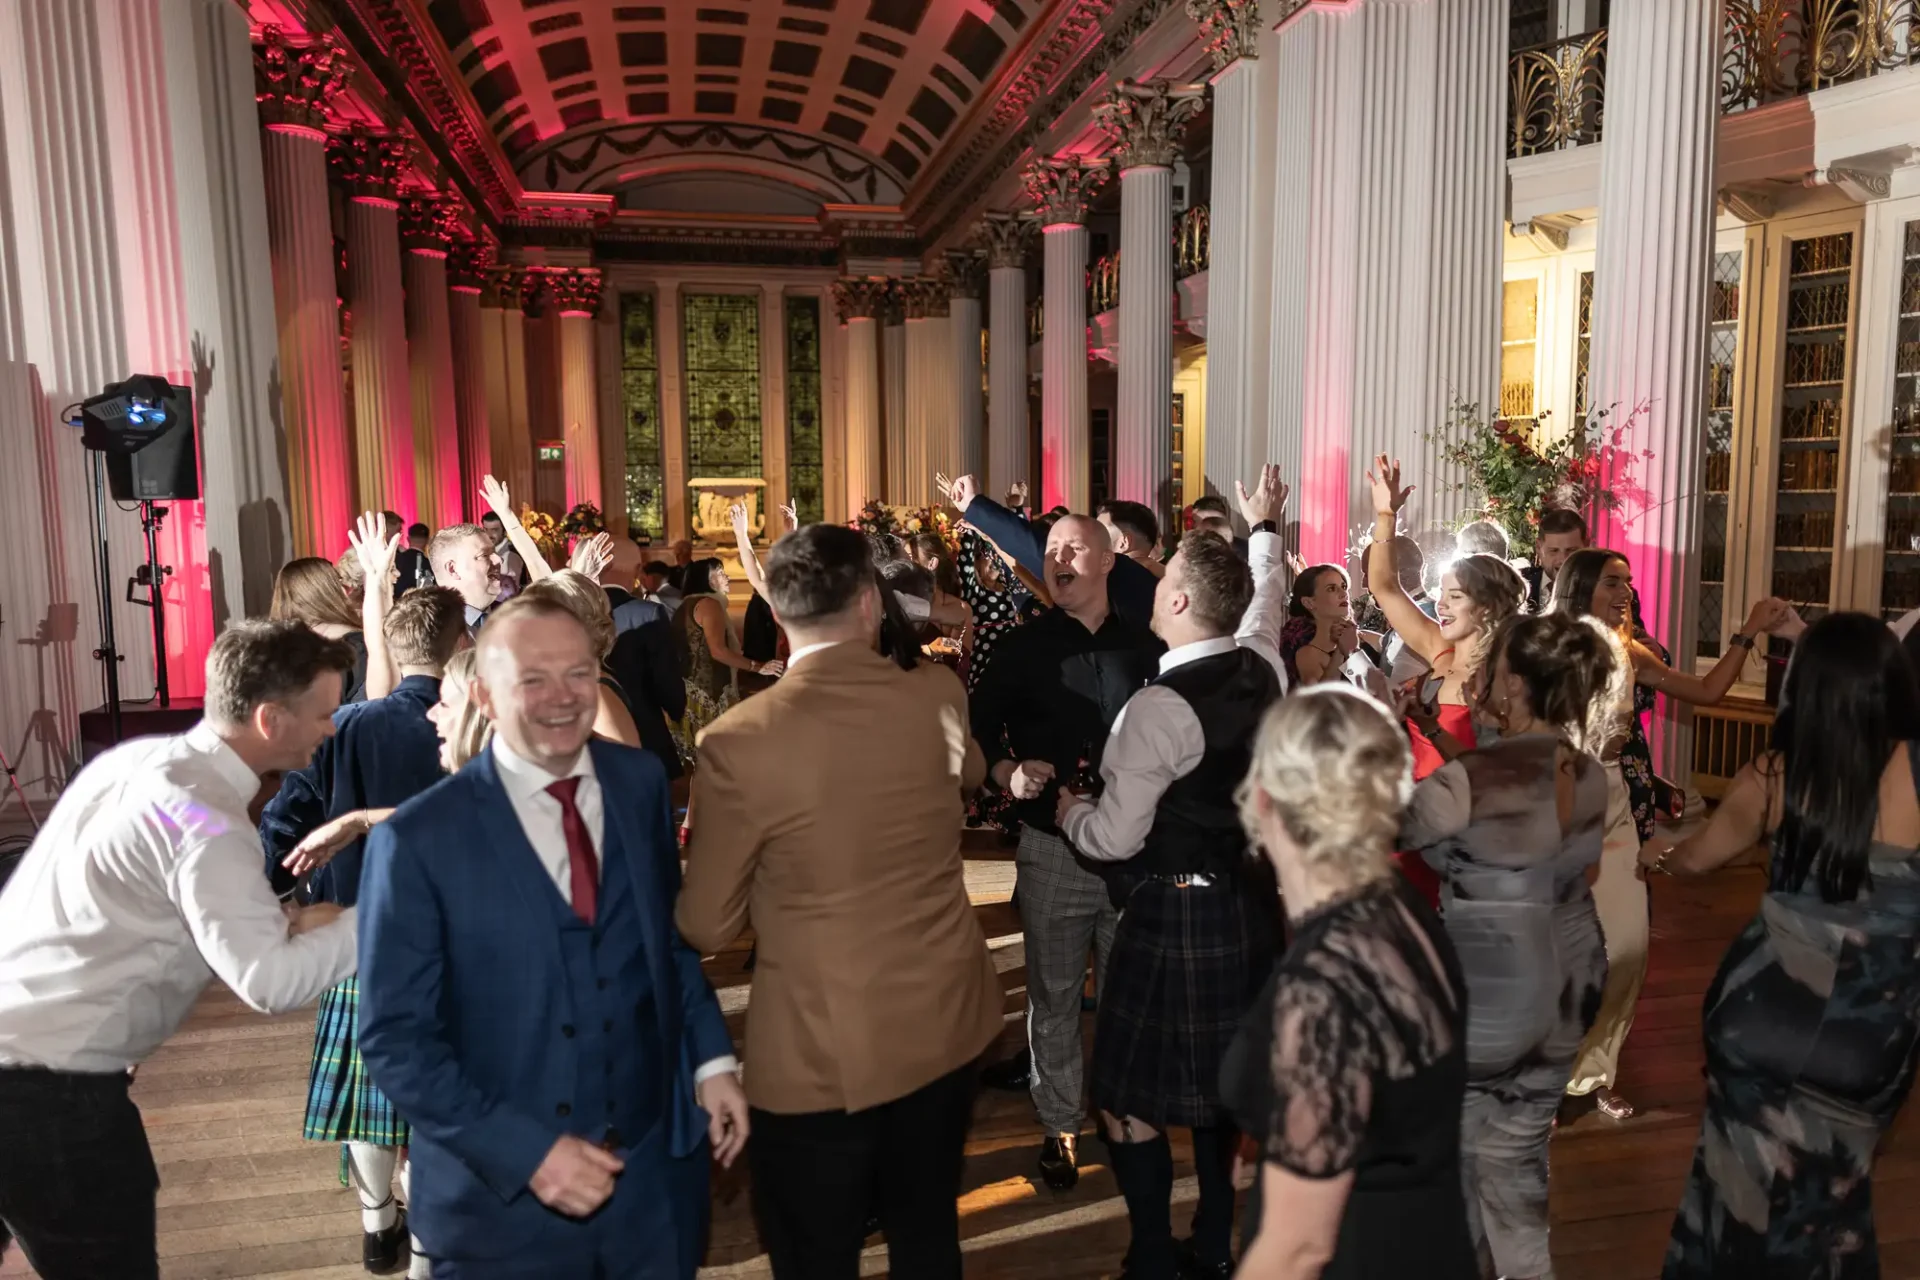 Guests in formal attire dancing and enjoying a celebration in an elegantly lit hall with classical architectural details.